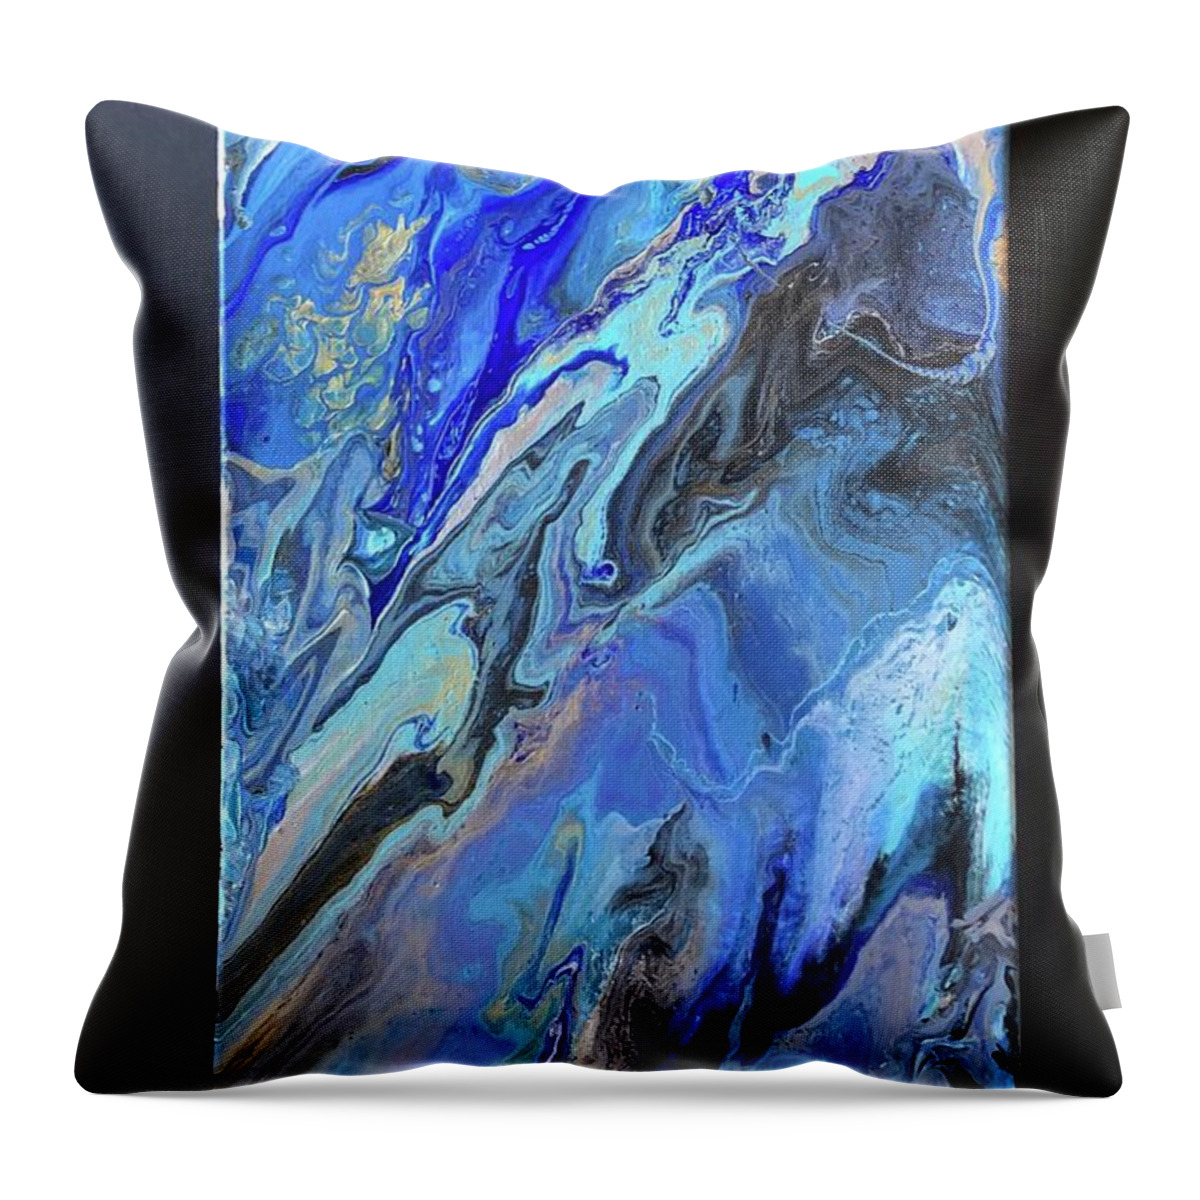 Abstract Acrylic Art Throw Pillow featuring the painting Blue Jazz by Donna Carrillo